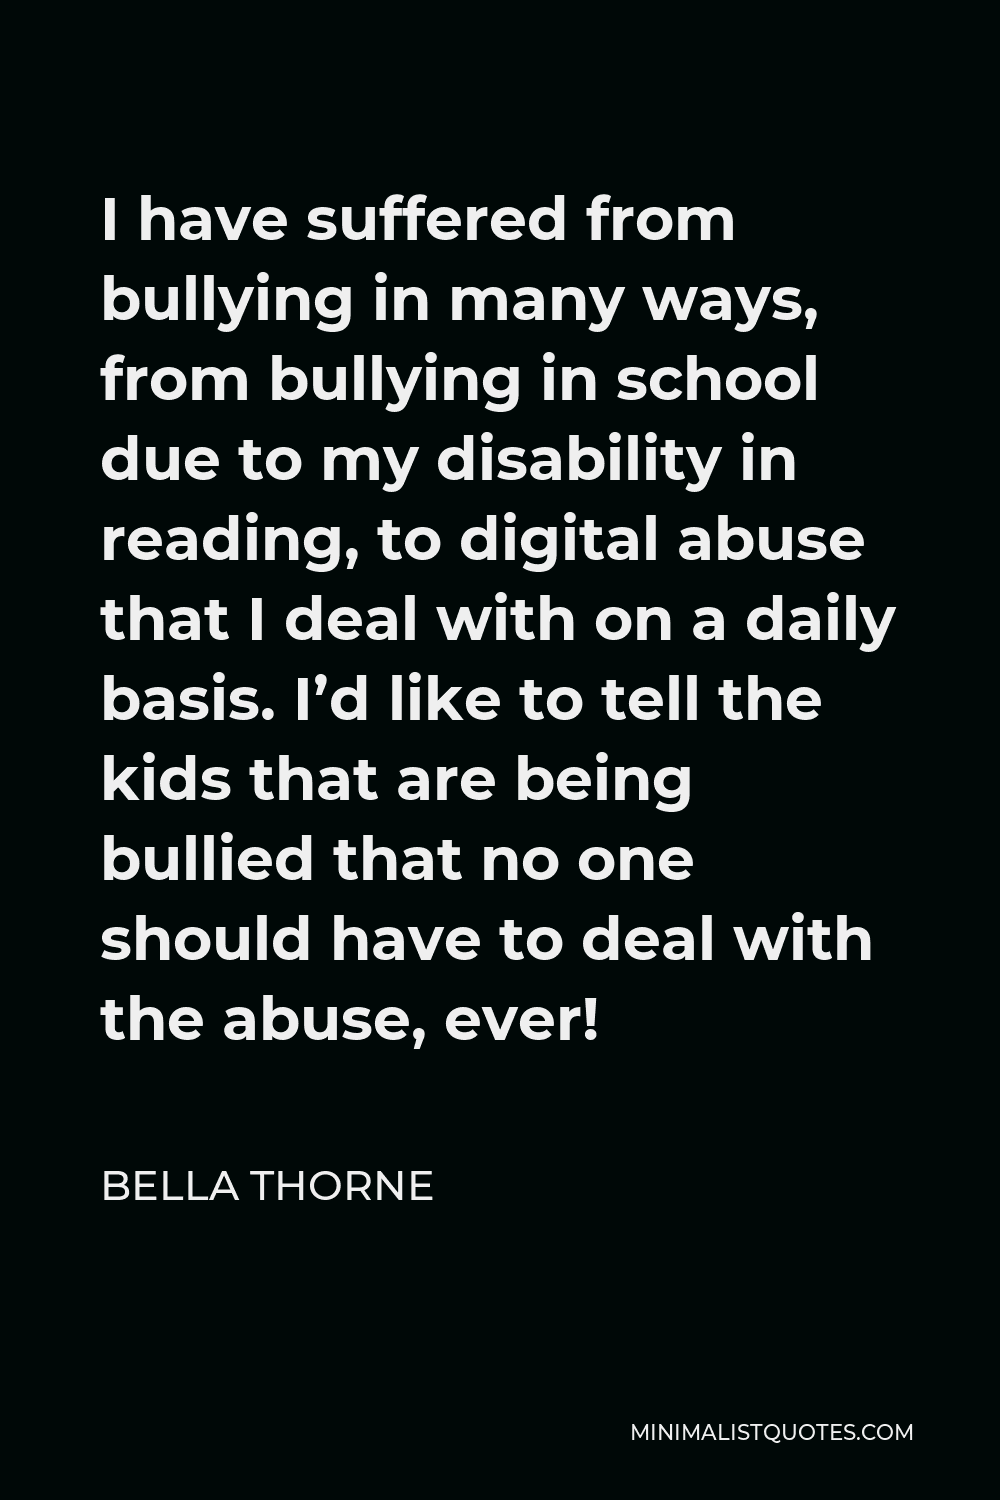 Bella Thorne Quote - I have suffered from bullying in many ways, from bullying in school due to my disability in reading, to digital abuse that I deal with on a daily basis. I’d like to tell the kids that are being bullied that no one should have to deal with the abuse, ever!